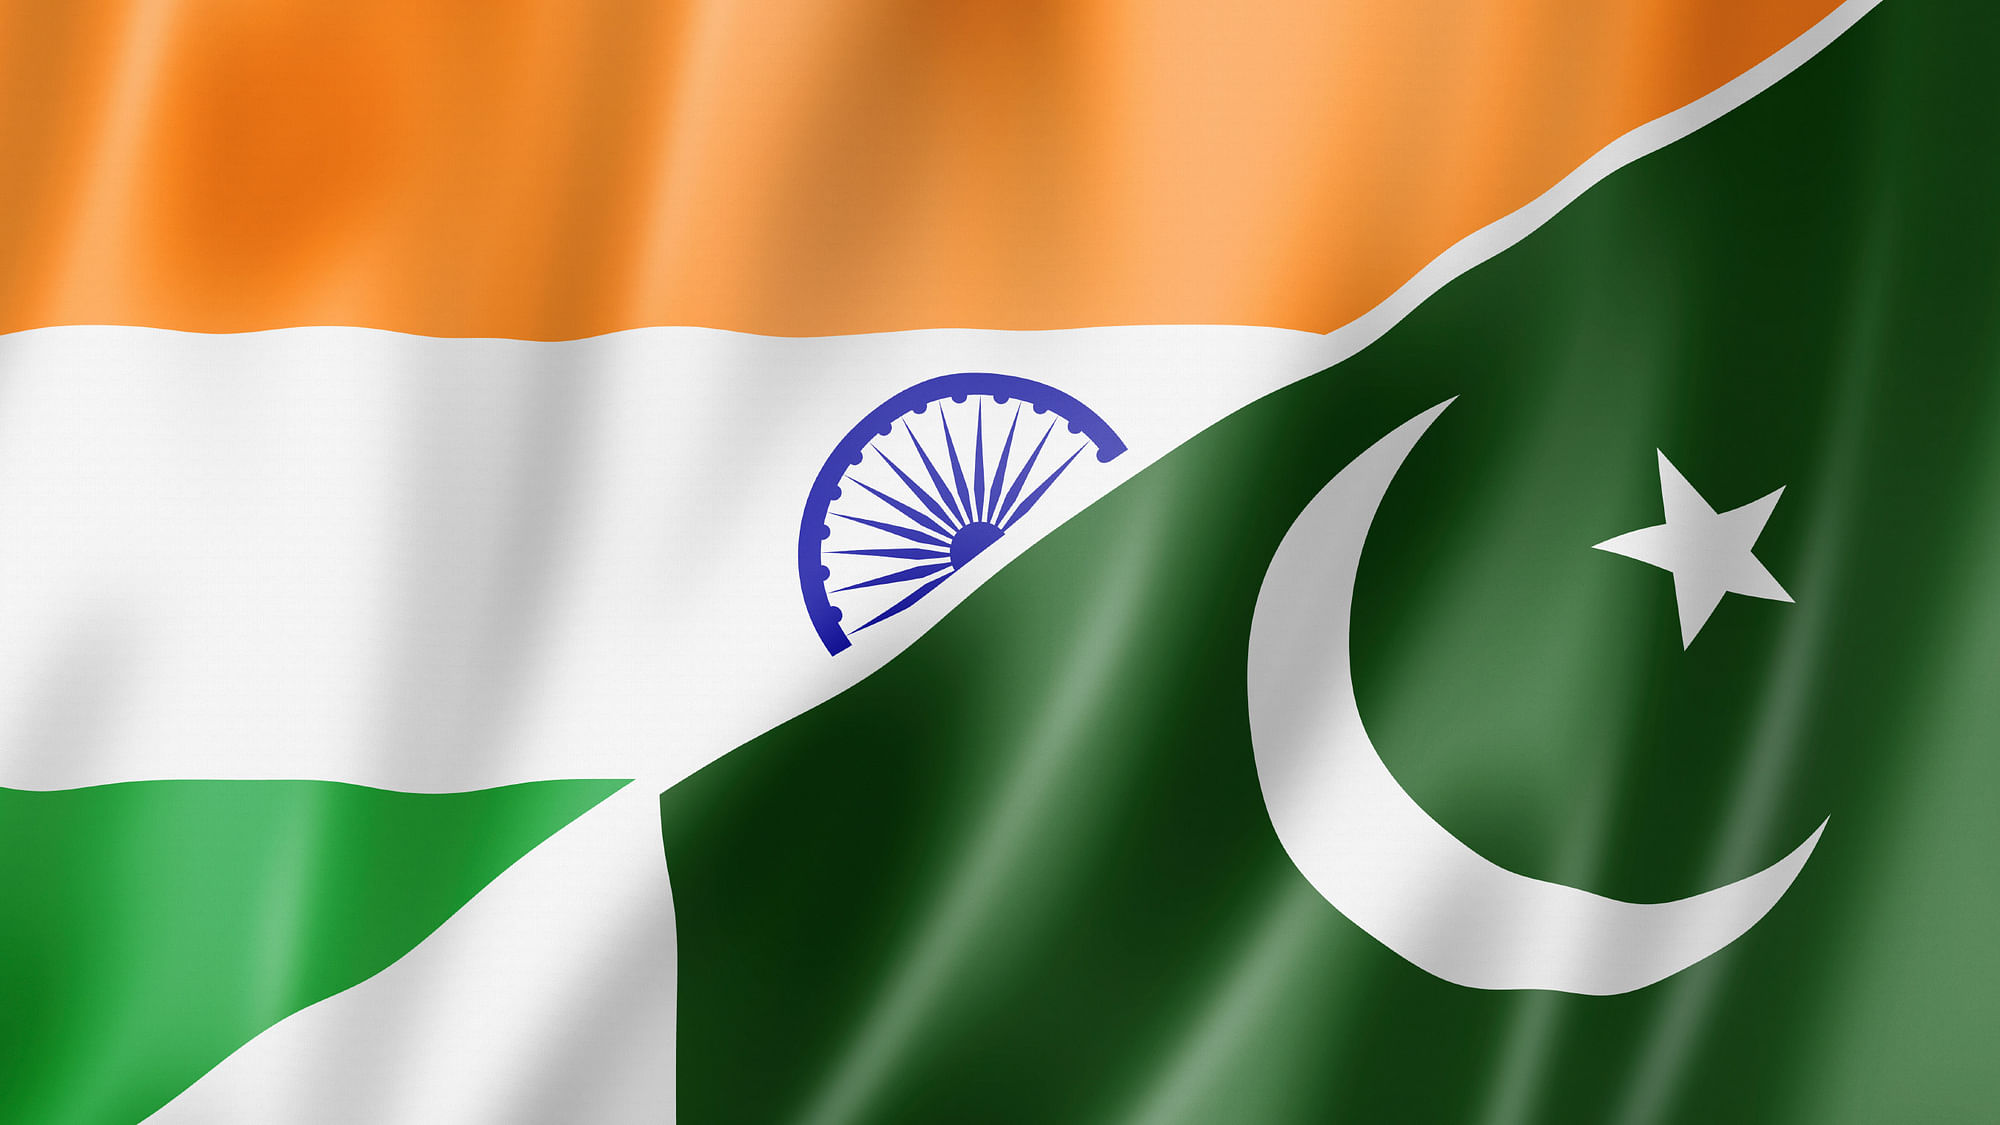 Flags of India and Pakistan.&nbsp;